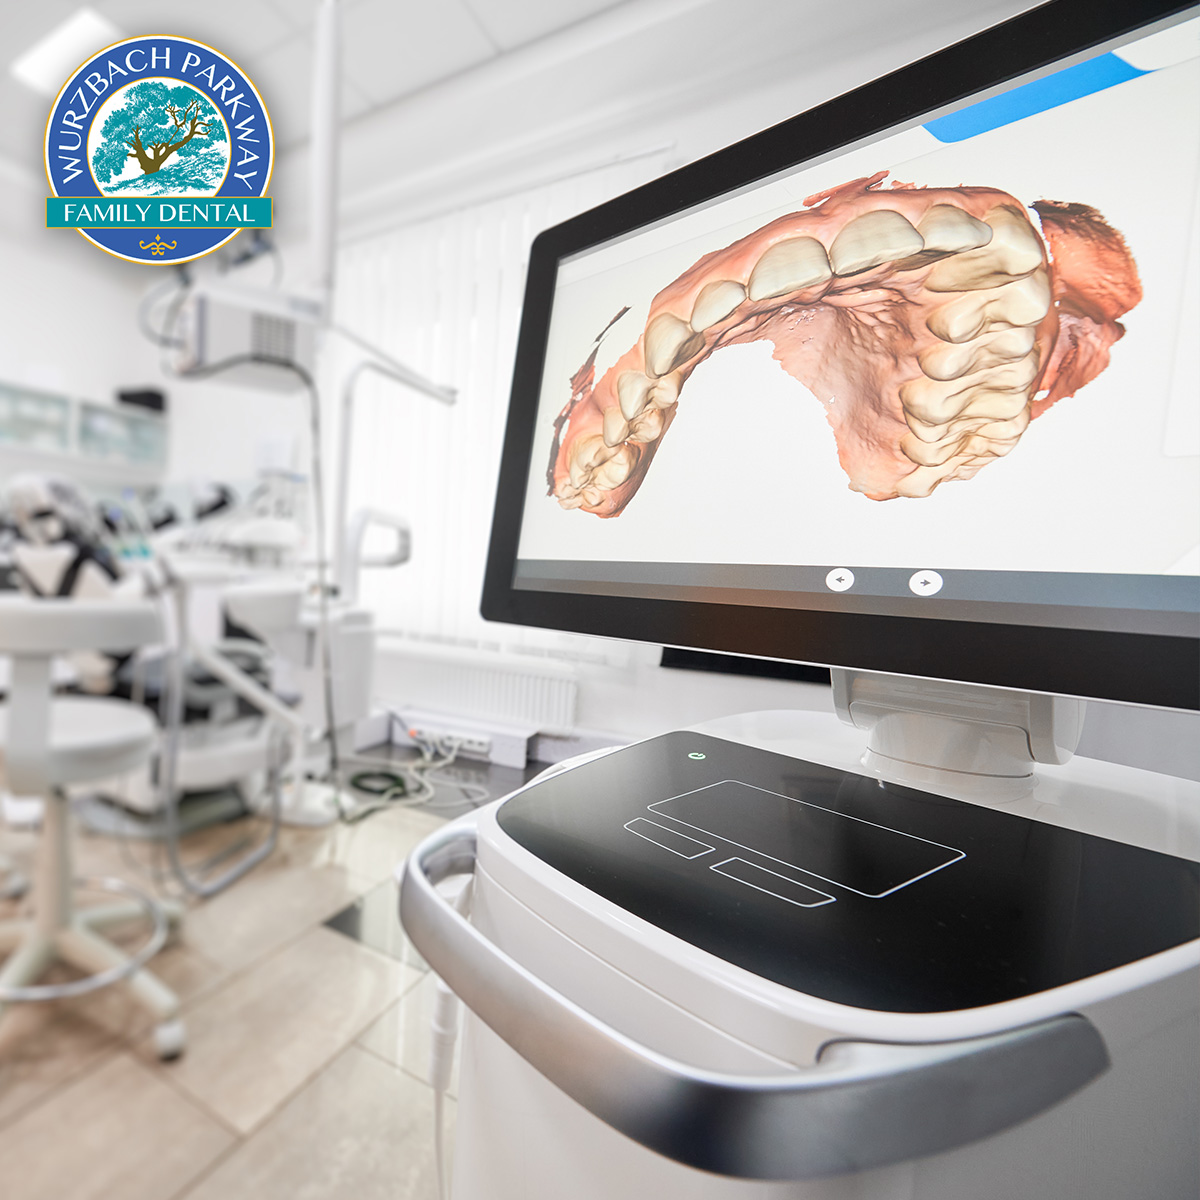 Experience the future of dentistry at Wurzbach Parkway Family Dental. We're a 100% fully digital office. Minimize wait times and experience top-notch results.

Plan a visit with us at bit.ly/3y1Me6k

#FullyDigitalOffice #DentalInnovation #AdvancedTechnology #WPFD